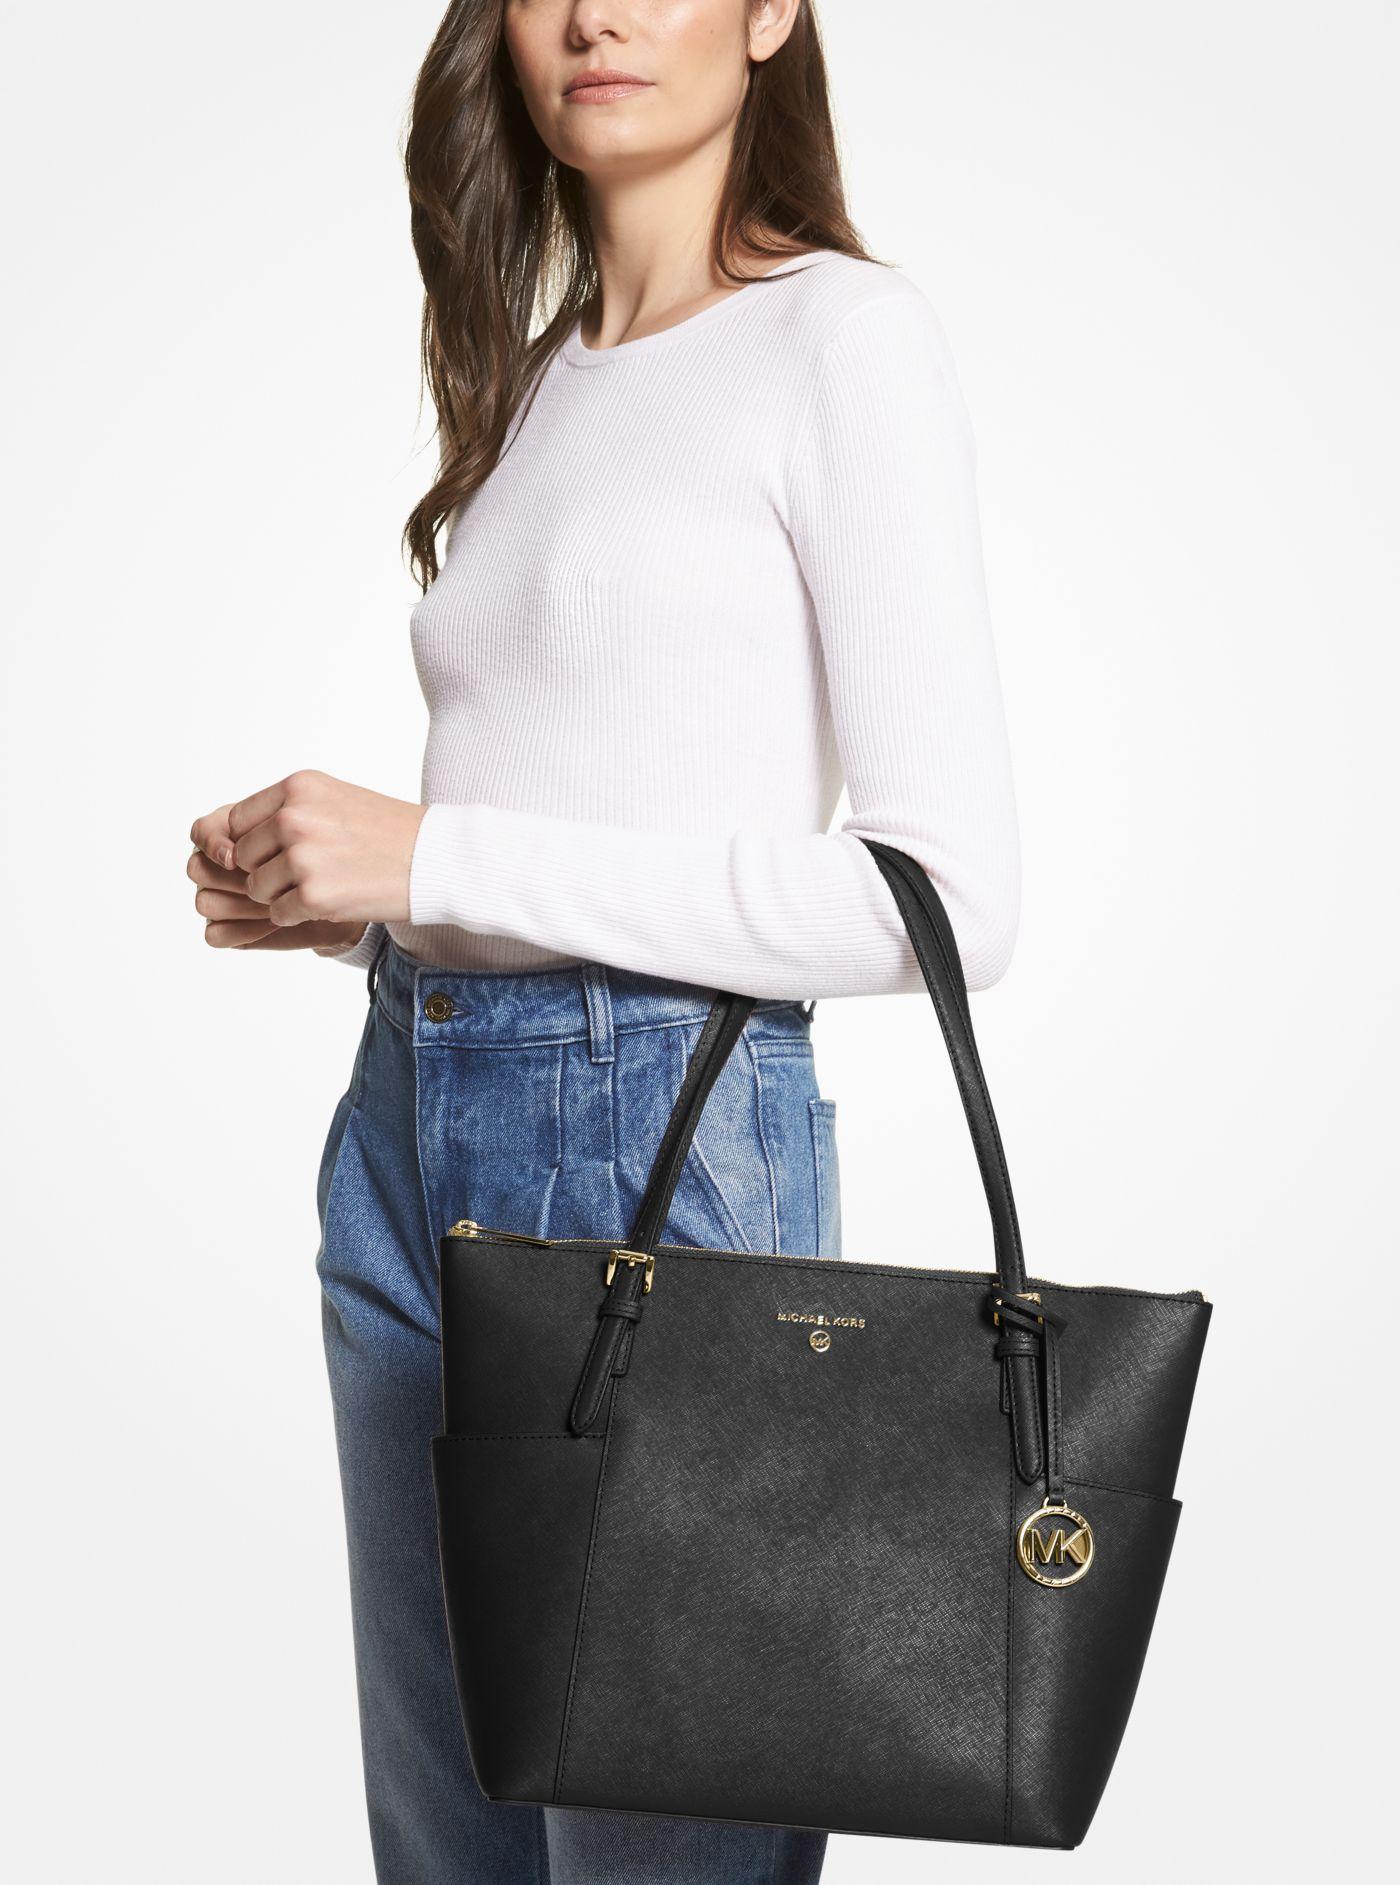 Michael Kors Jet Set Large Saffiano Leather Top-zip Tote Bag in Black | Lyst